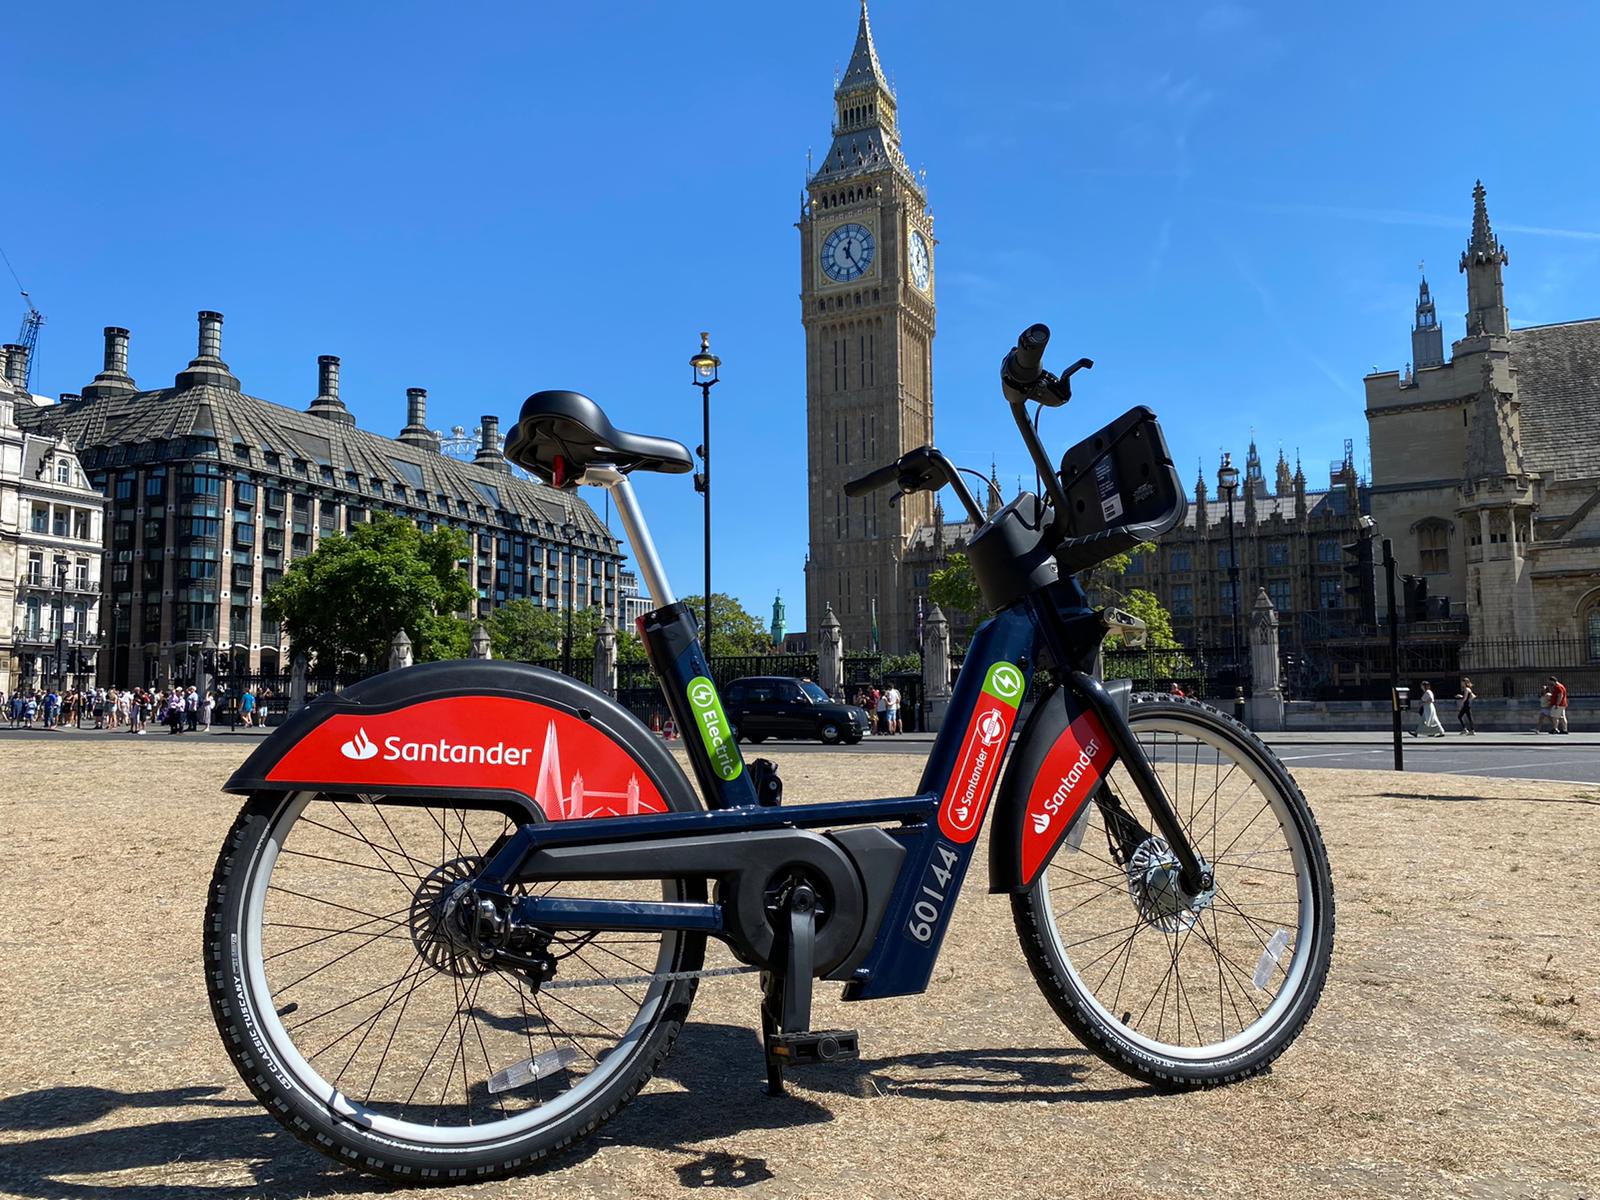 Santander Cycles usage breaks records for 11 months straight